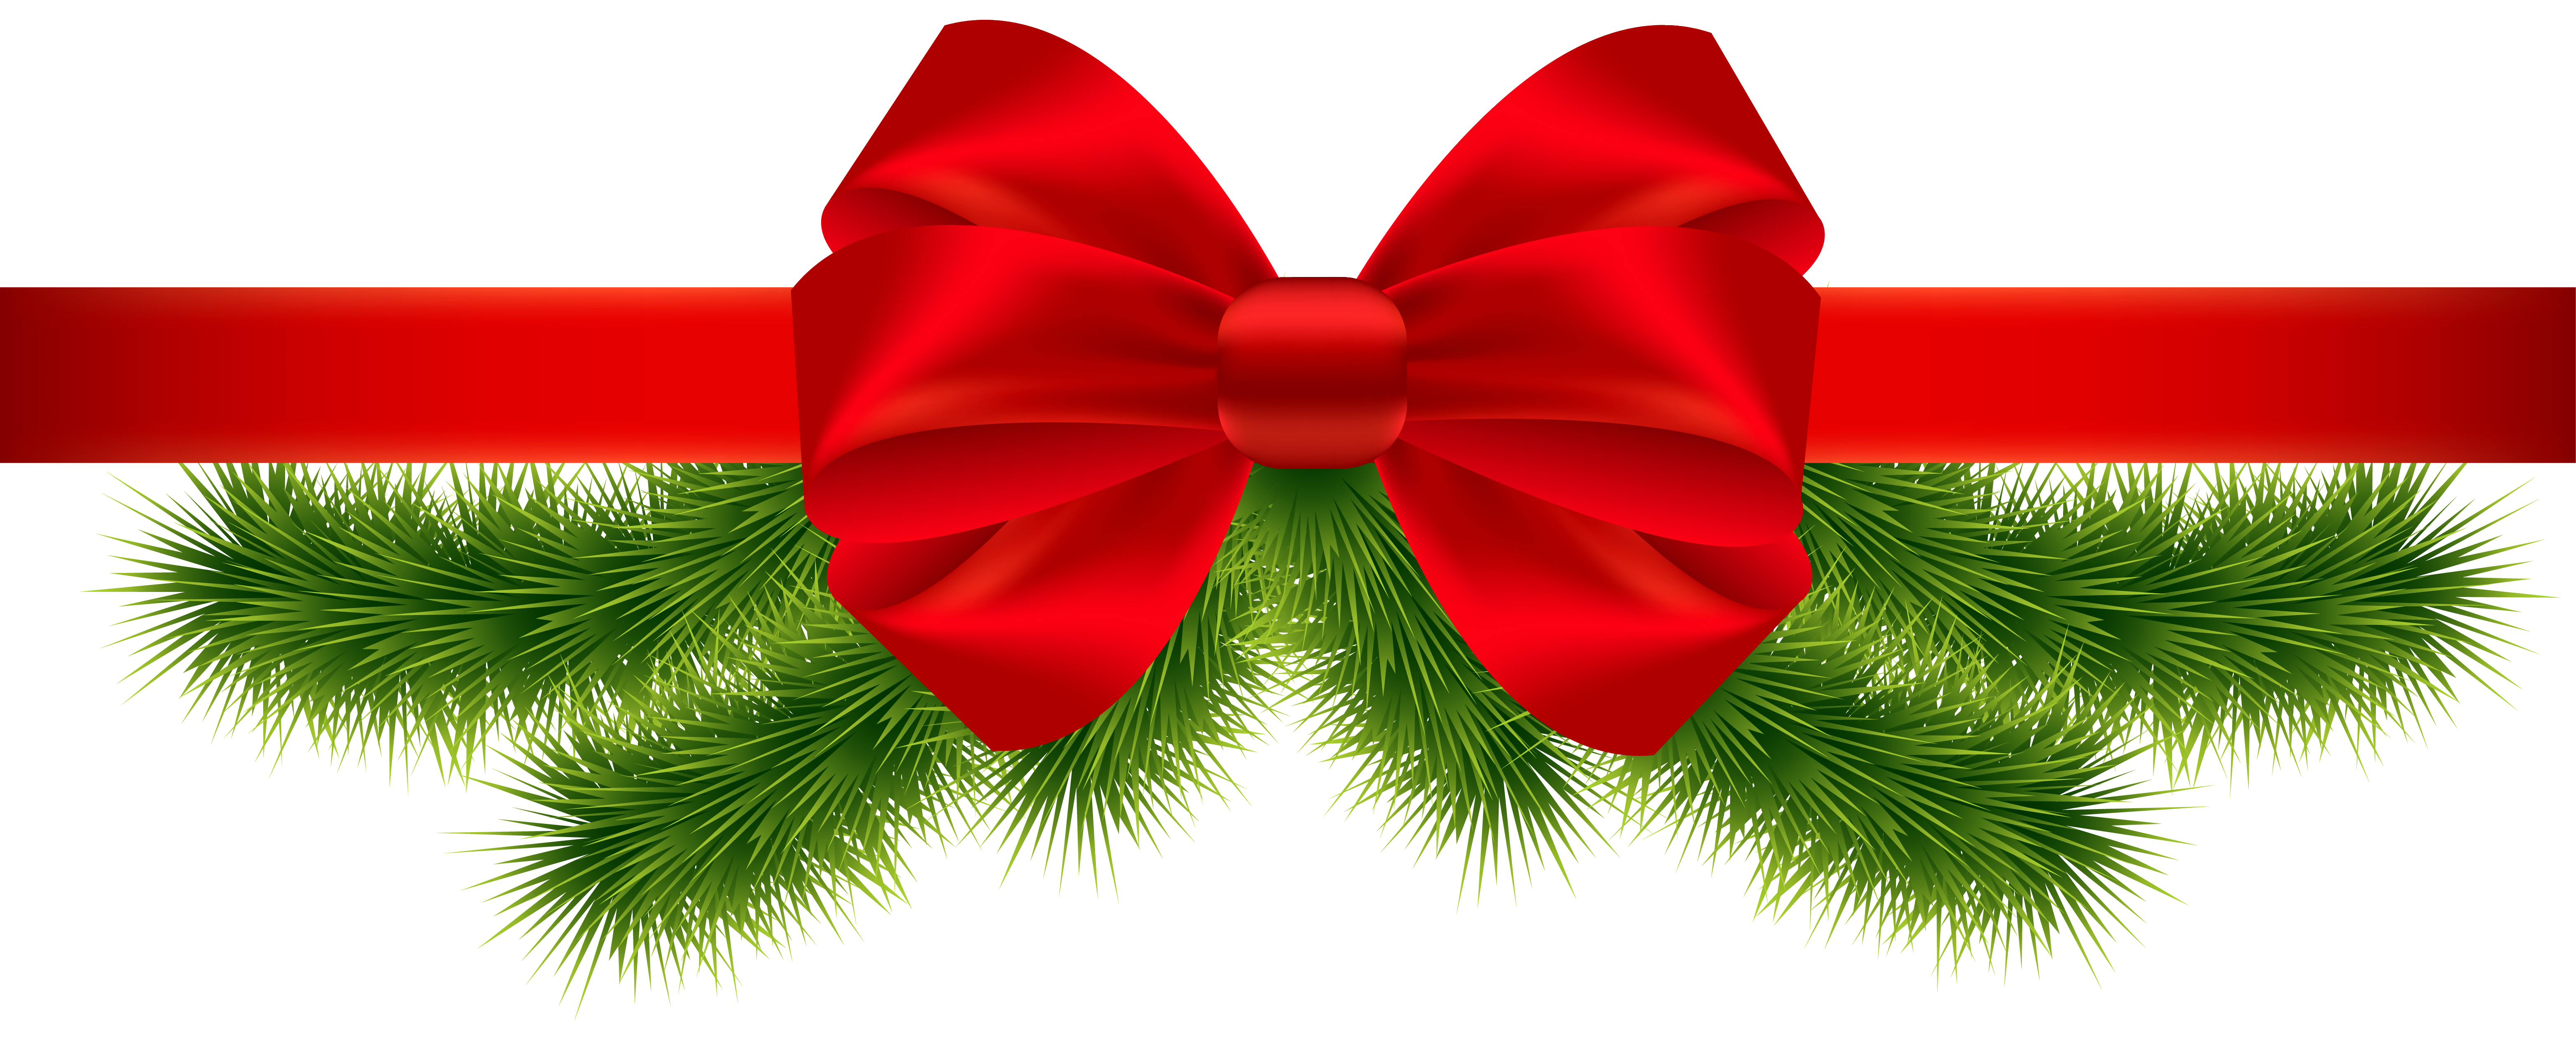 Christmas Red Ribbon PNG Clipart Image | Gallery ...
